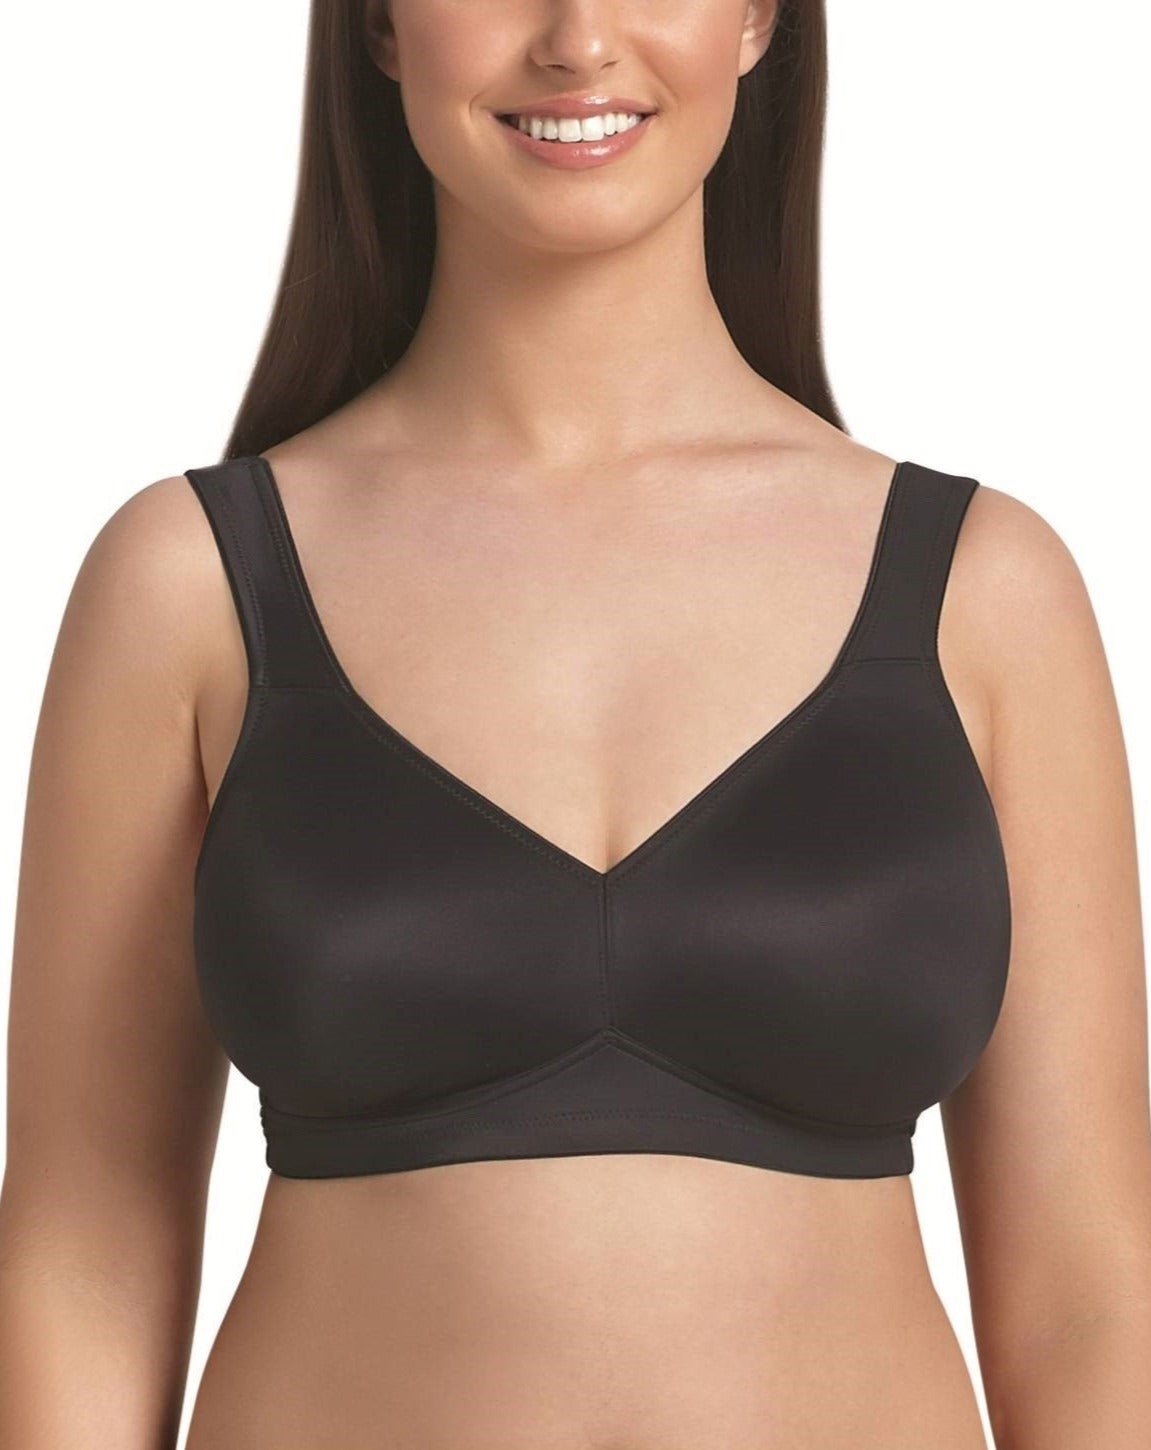 Rosa Faia 5631-596 Women's Selma Rosewood Pink Non-Wired Soft Bra